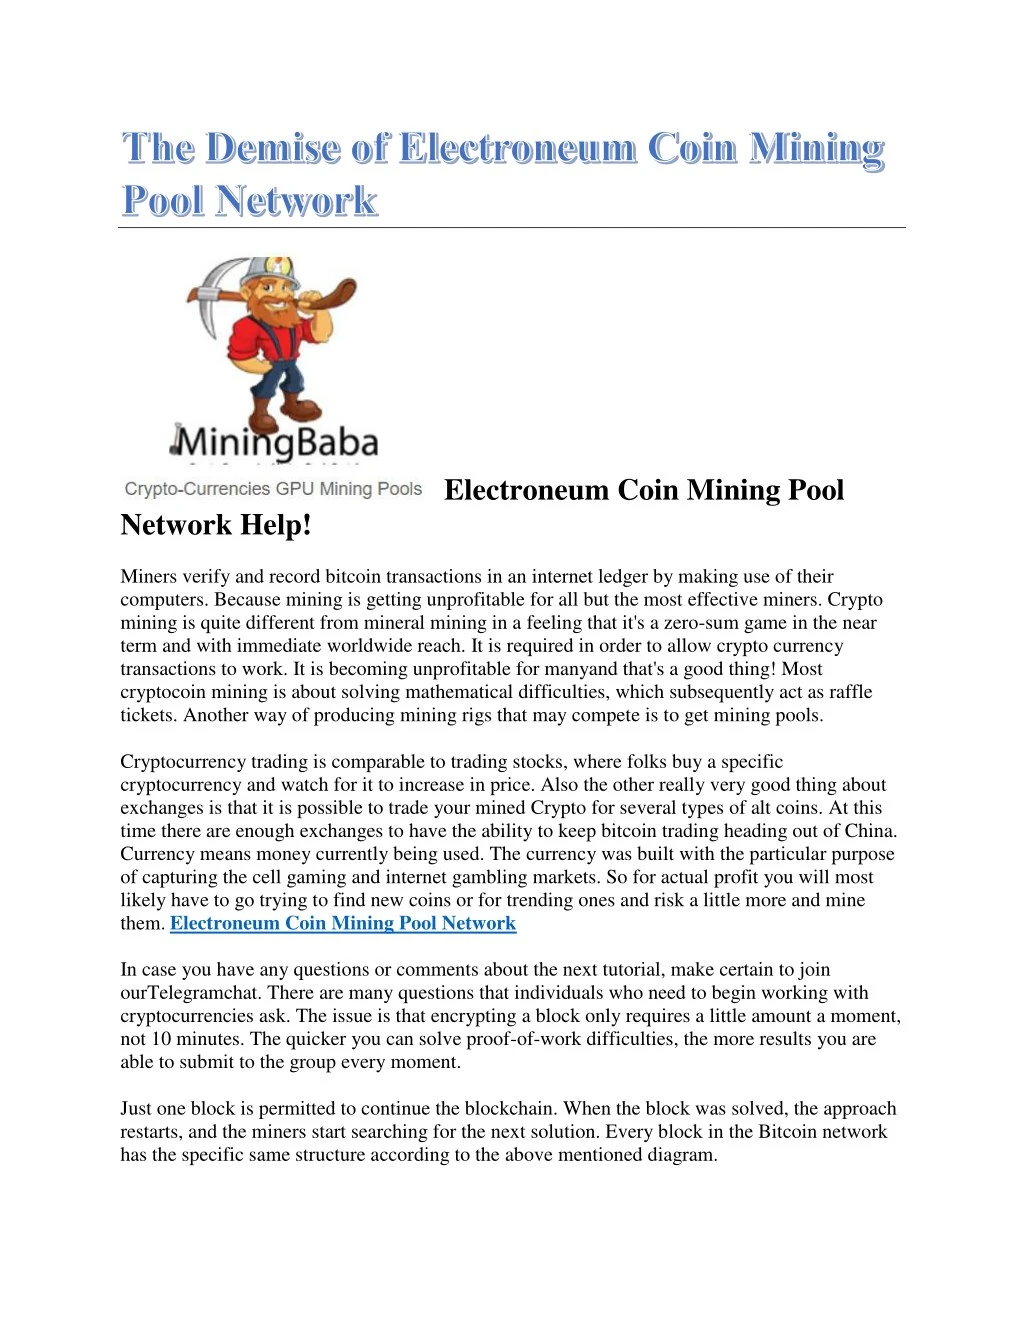 electroneum coin mining pool